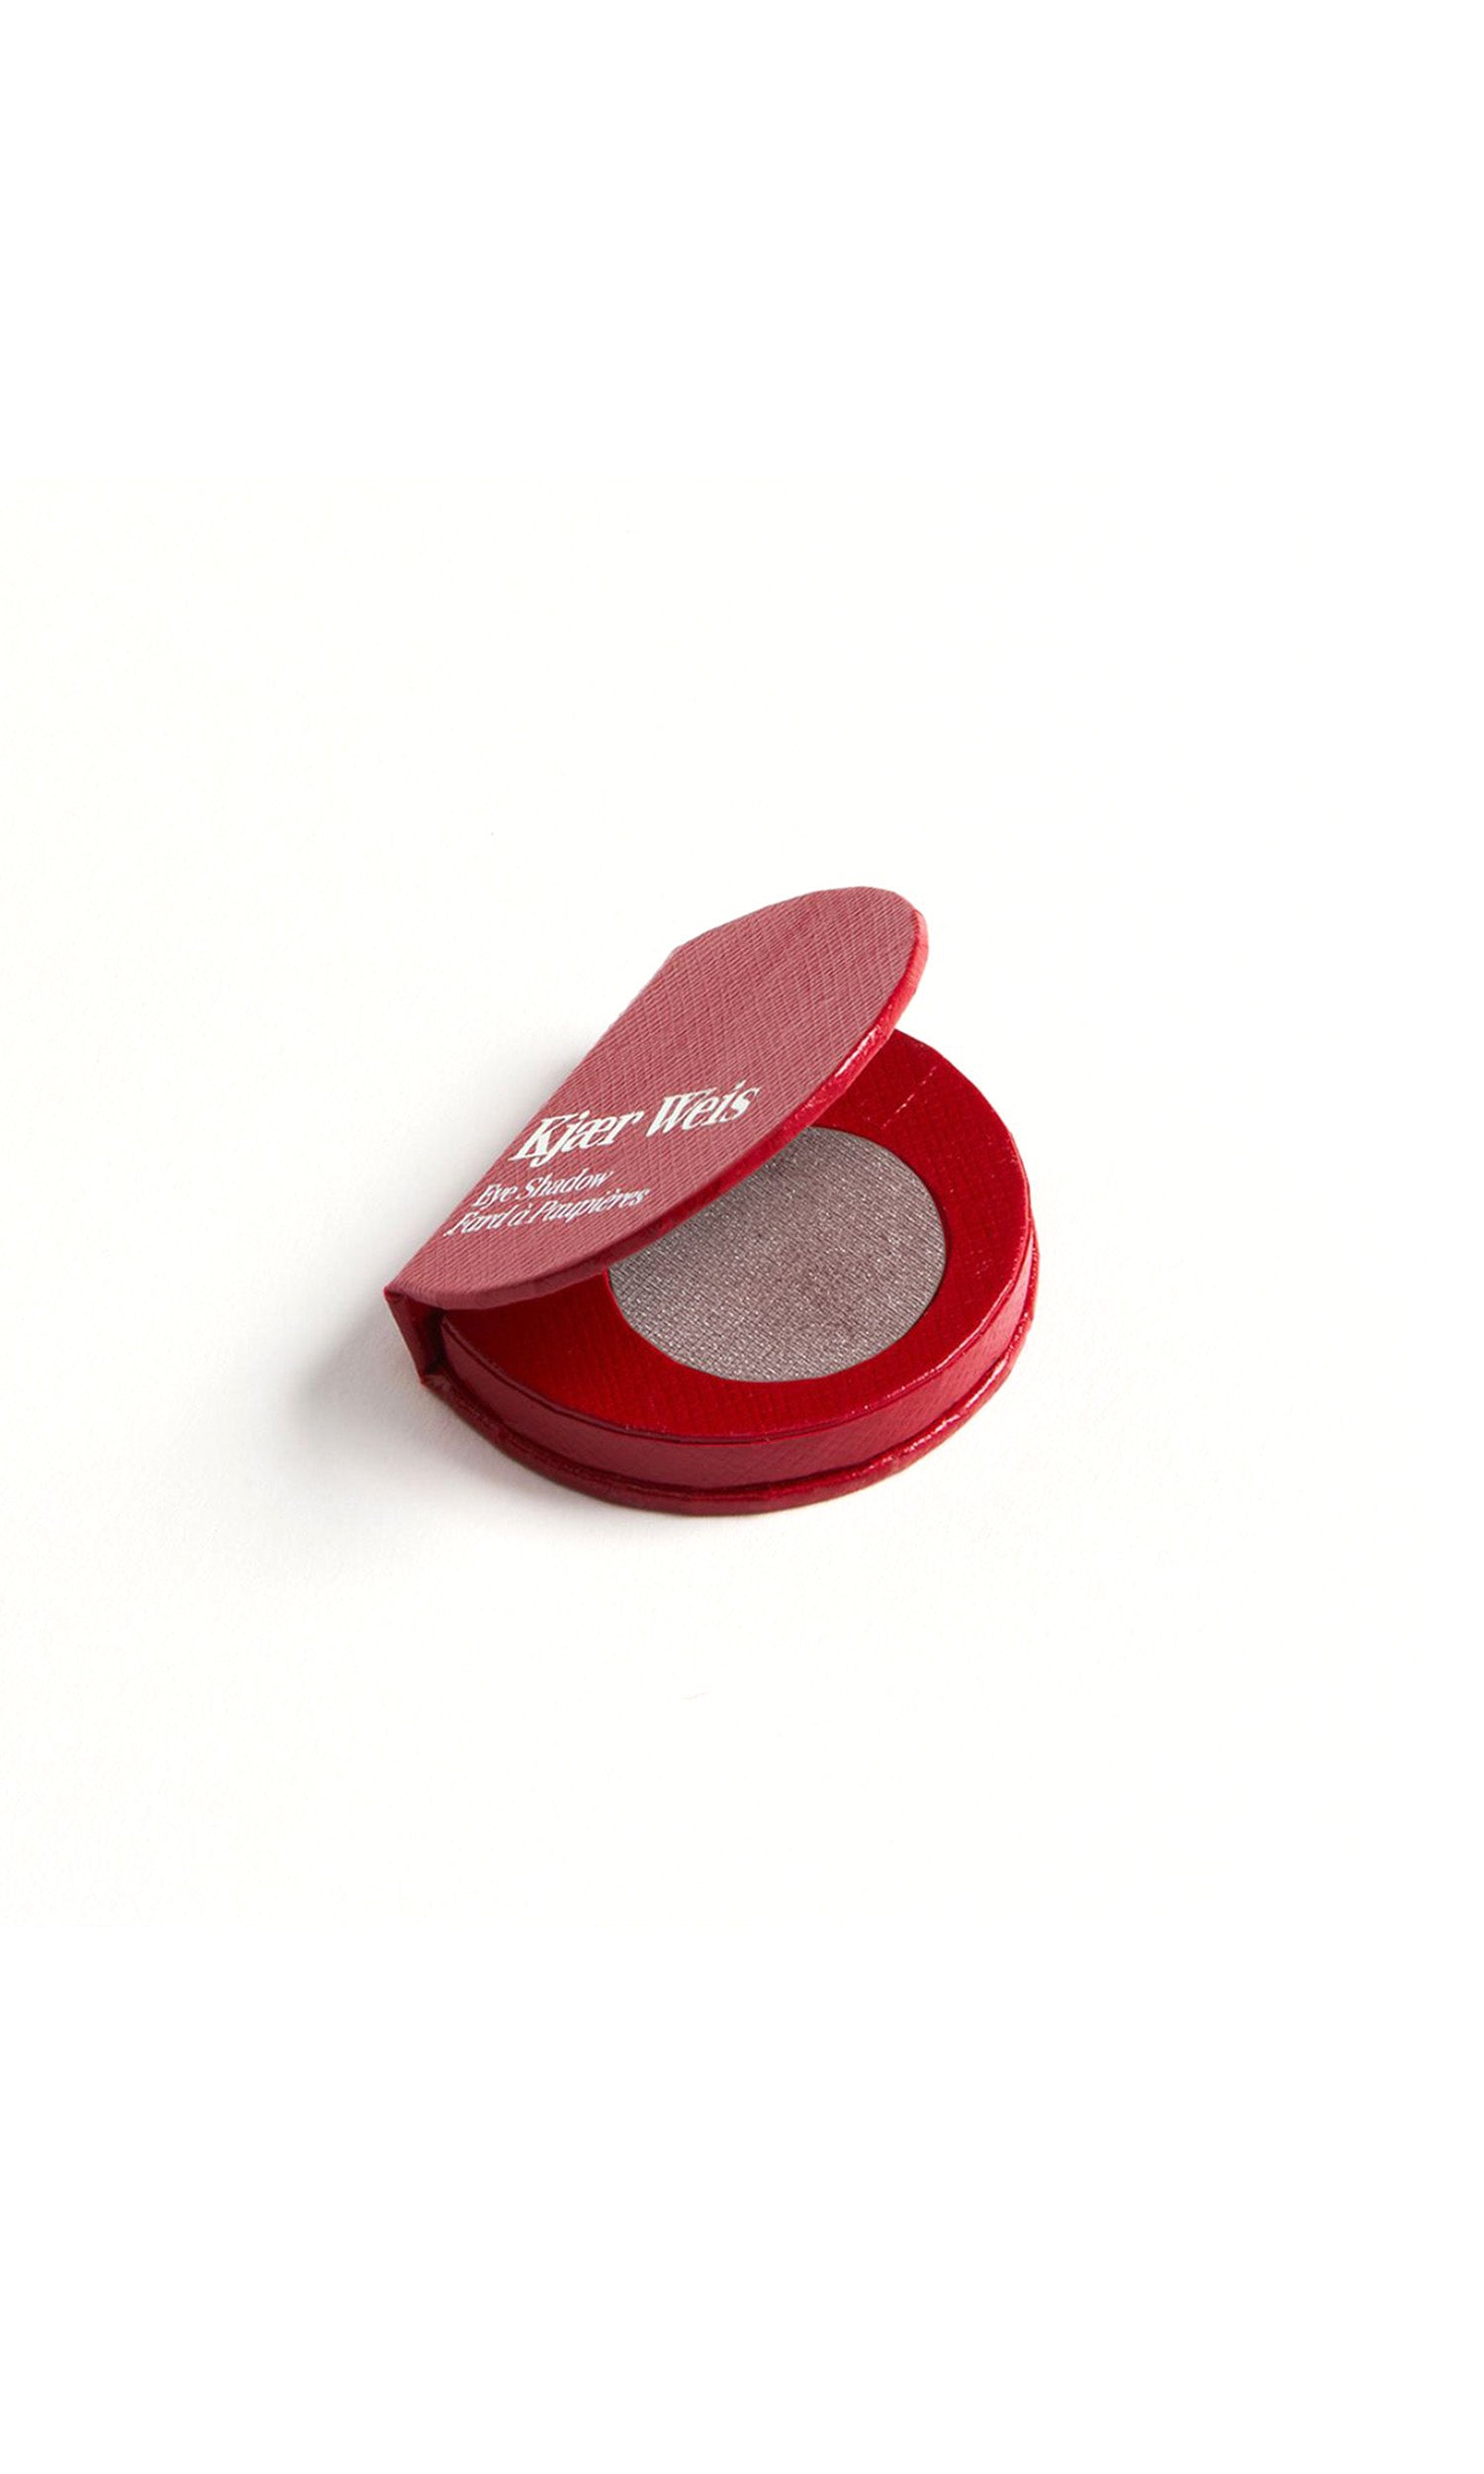 Red KW palette open to show the taupe eye shadow inside